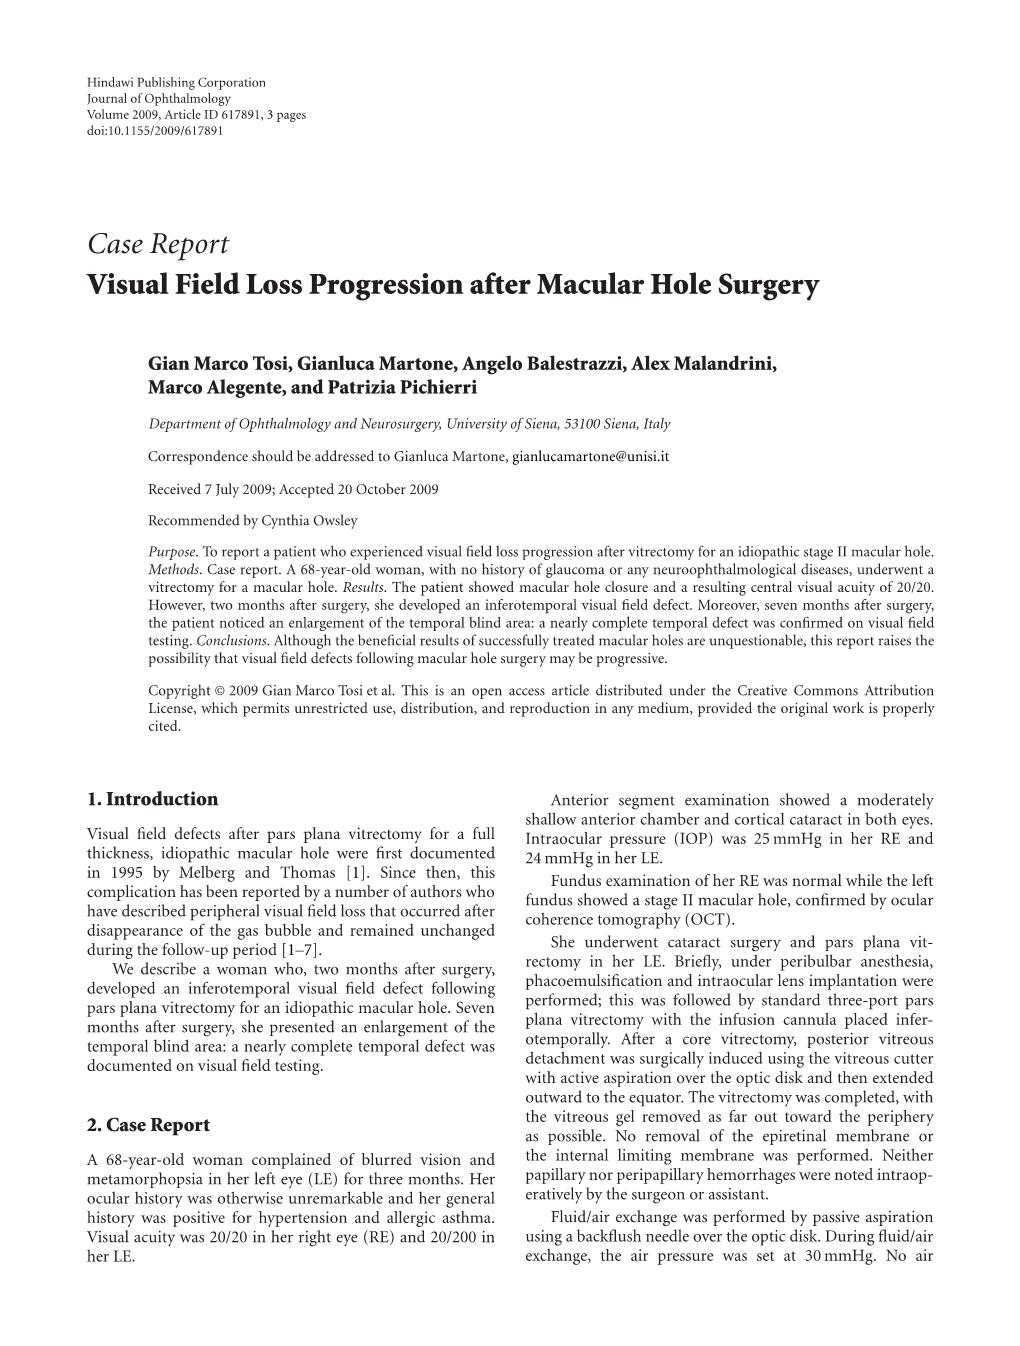 Visual Field Loss Progression After Macular Hole Surgery